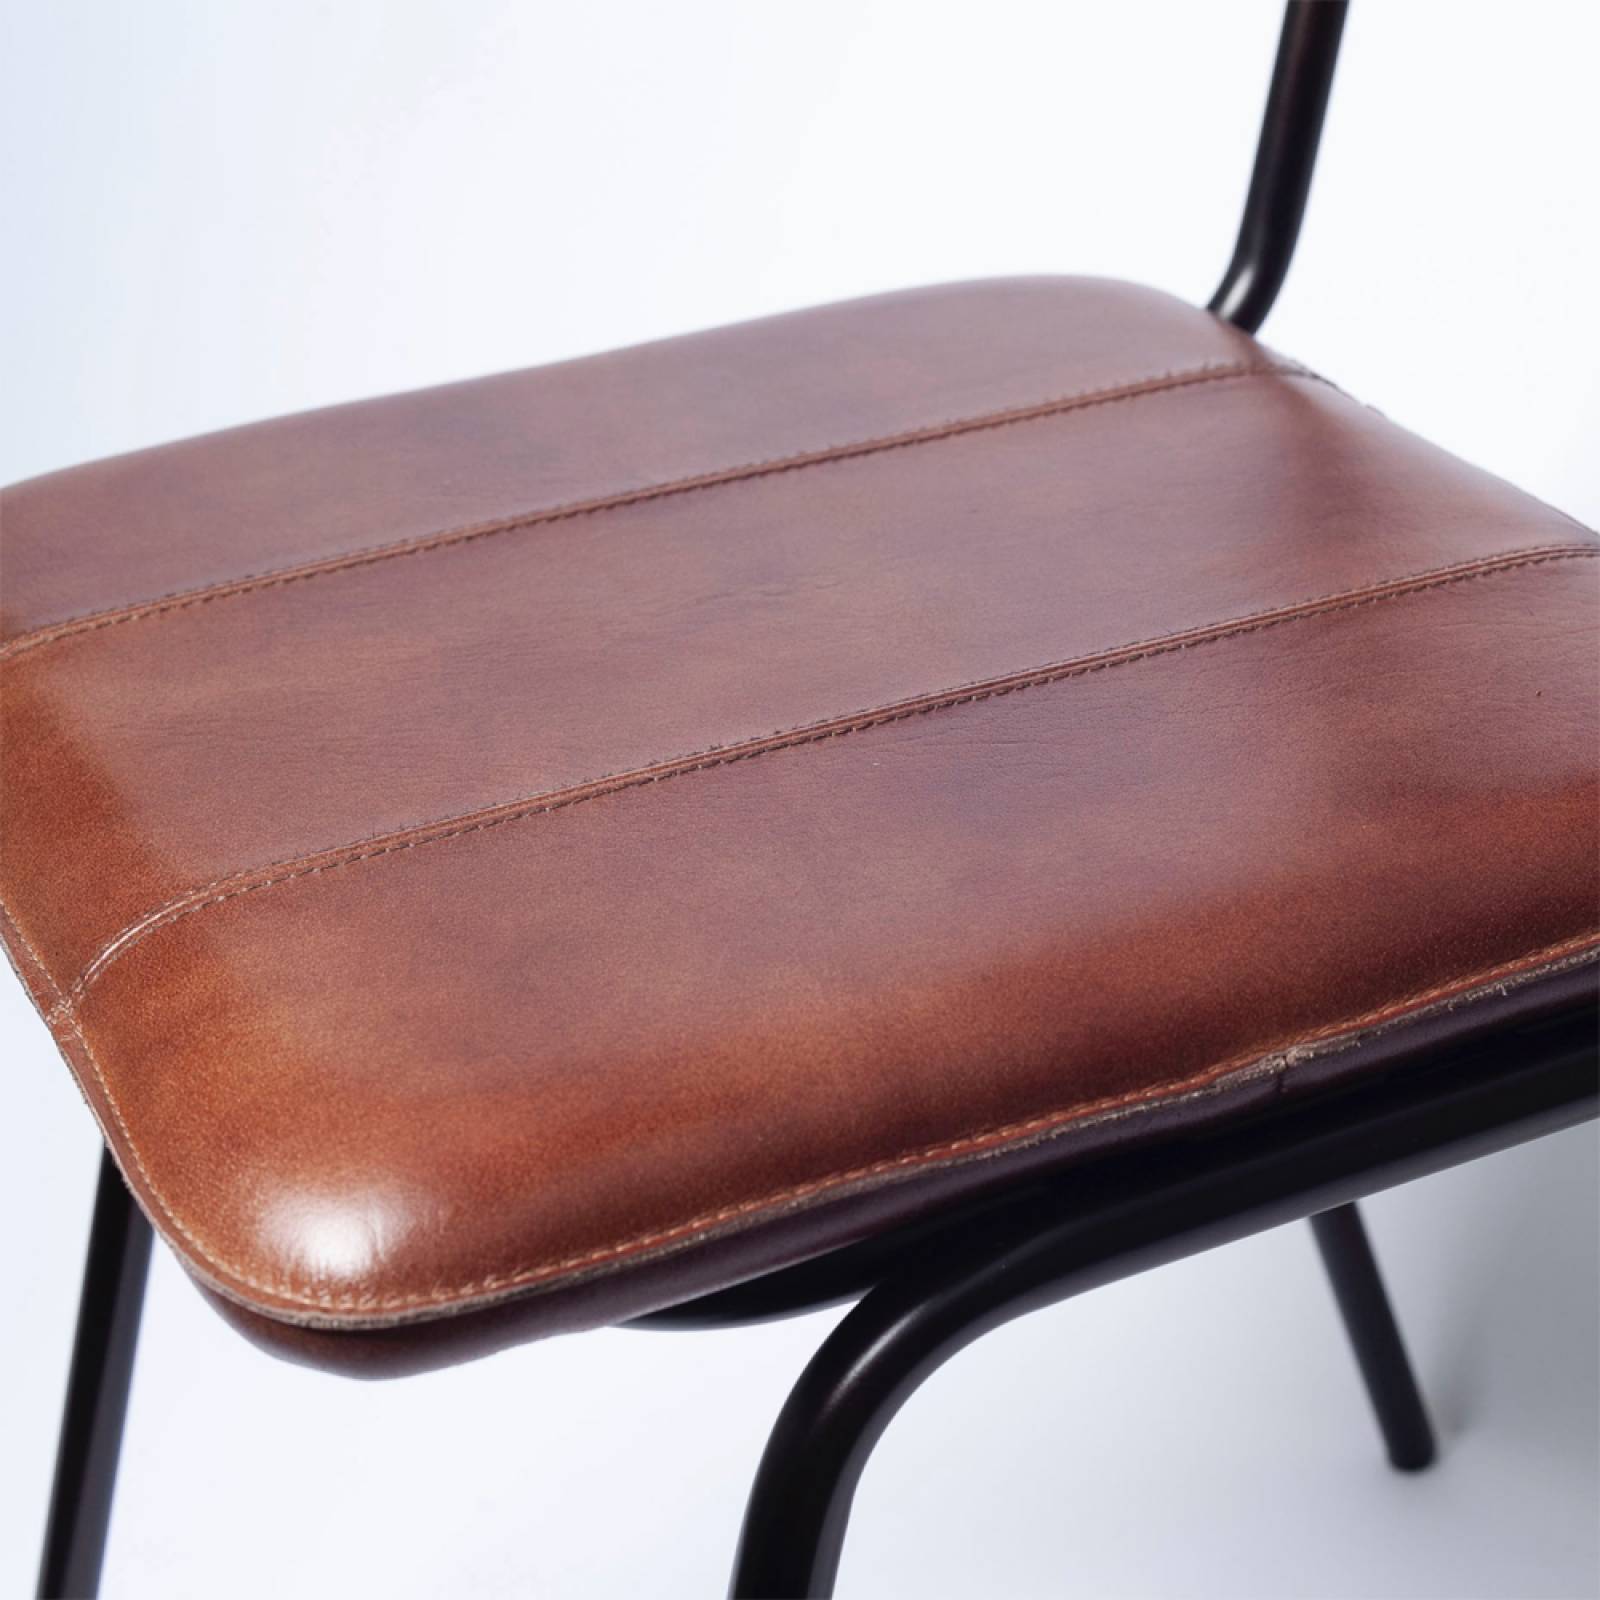 Ukari Dining Chair In Chocolate Leather thumbnails